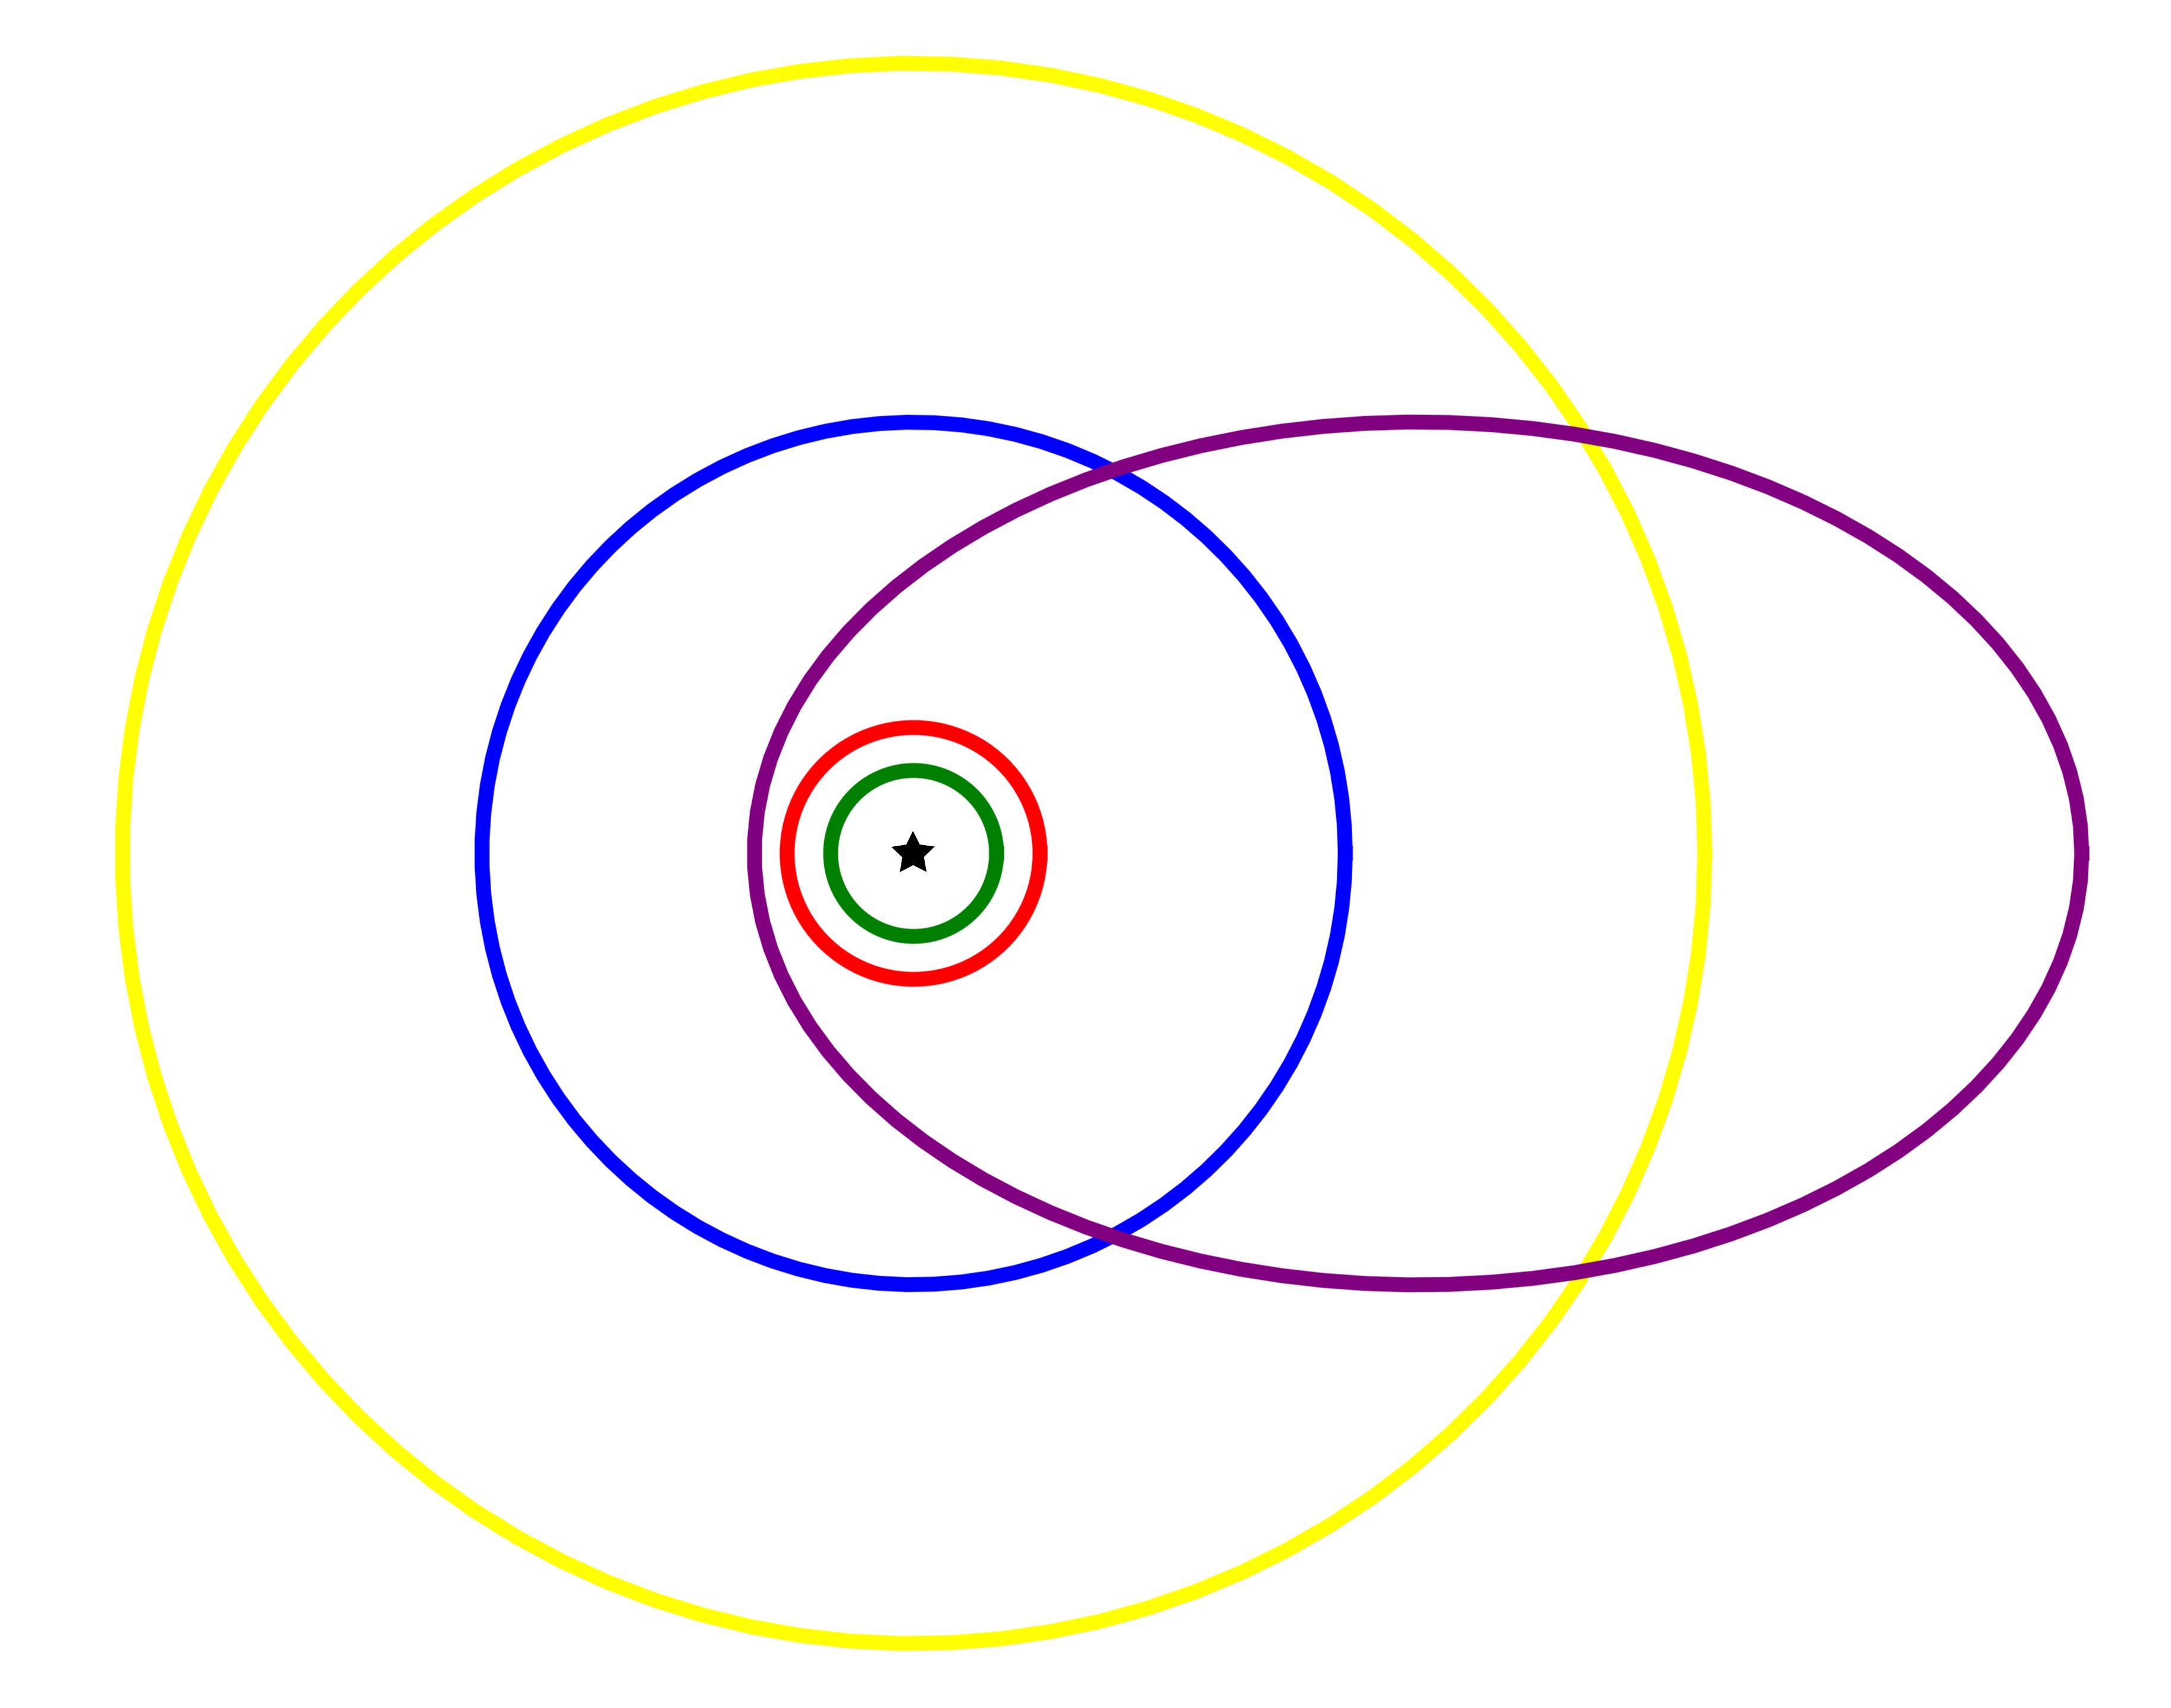 If HD83443c was in the Solar System, it would approach the Sun almost to the orbit of Mars, then swing outwards, ending up between the orbits of Saturn and Uranus, before falling Sunward once again. Color code: purple = HD83443c, green = Earth, red = Mars, blue = Jupiter and yellow = Saturn.